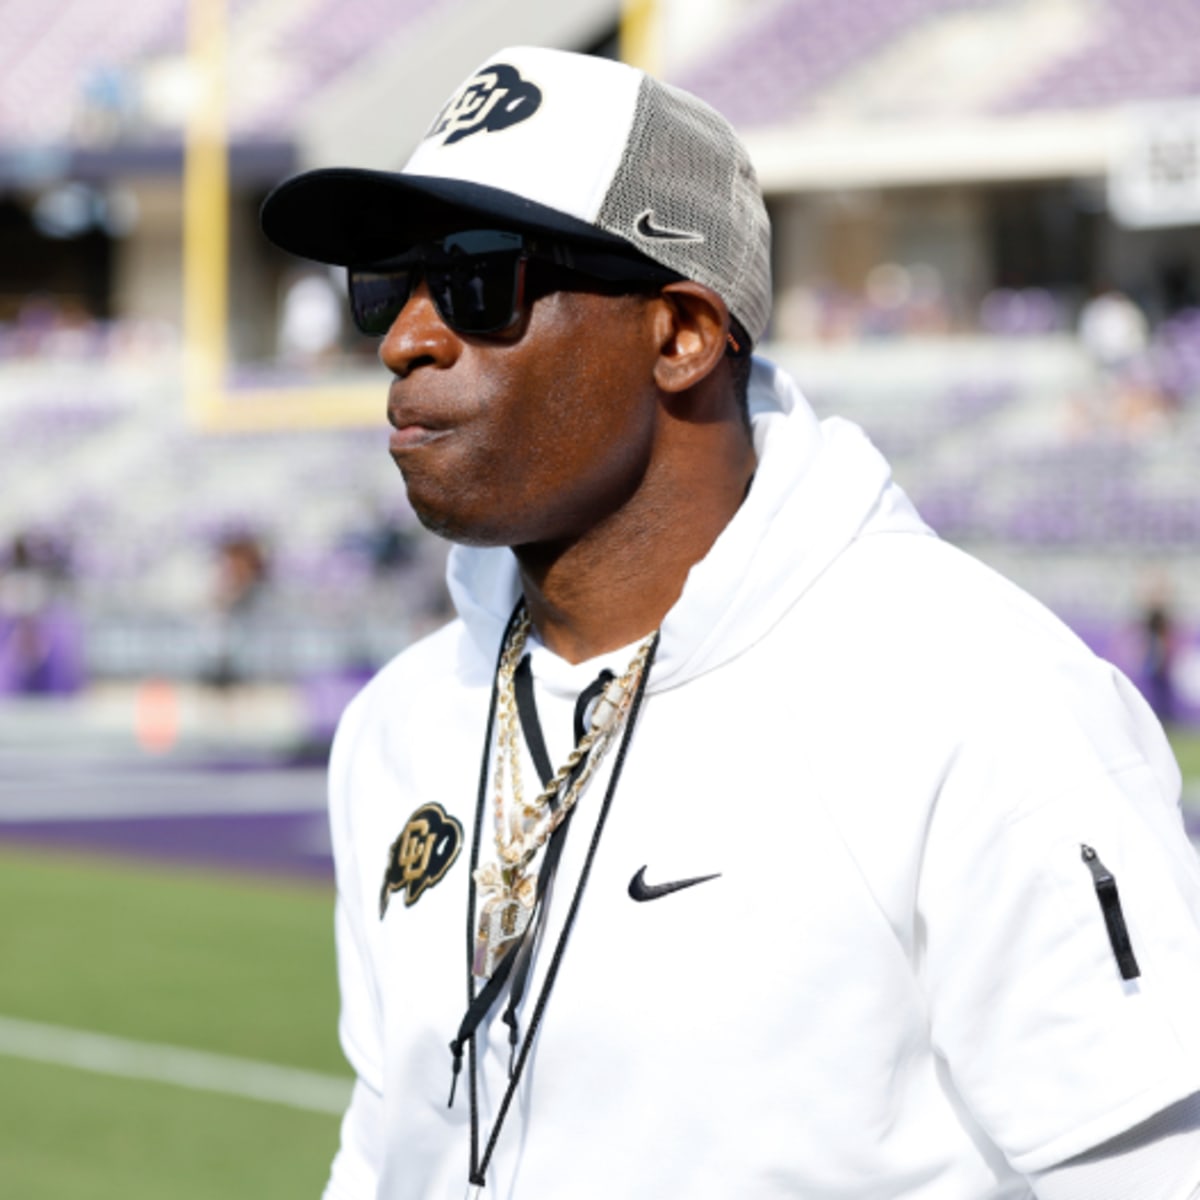 The hate directed at Deion Sanders after Colorado loss isn't about